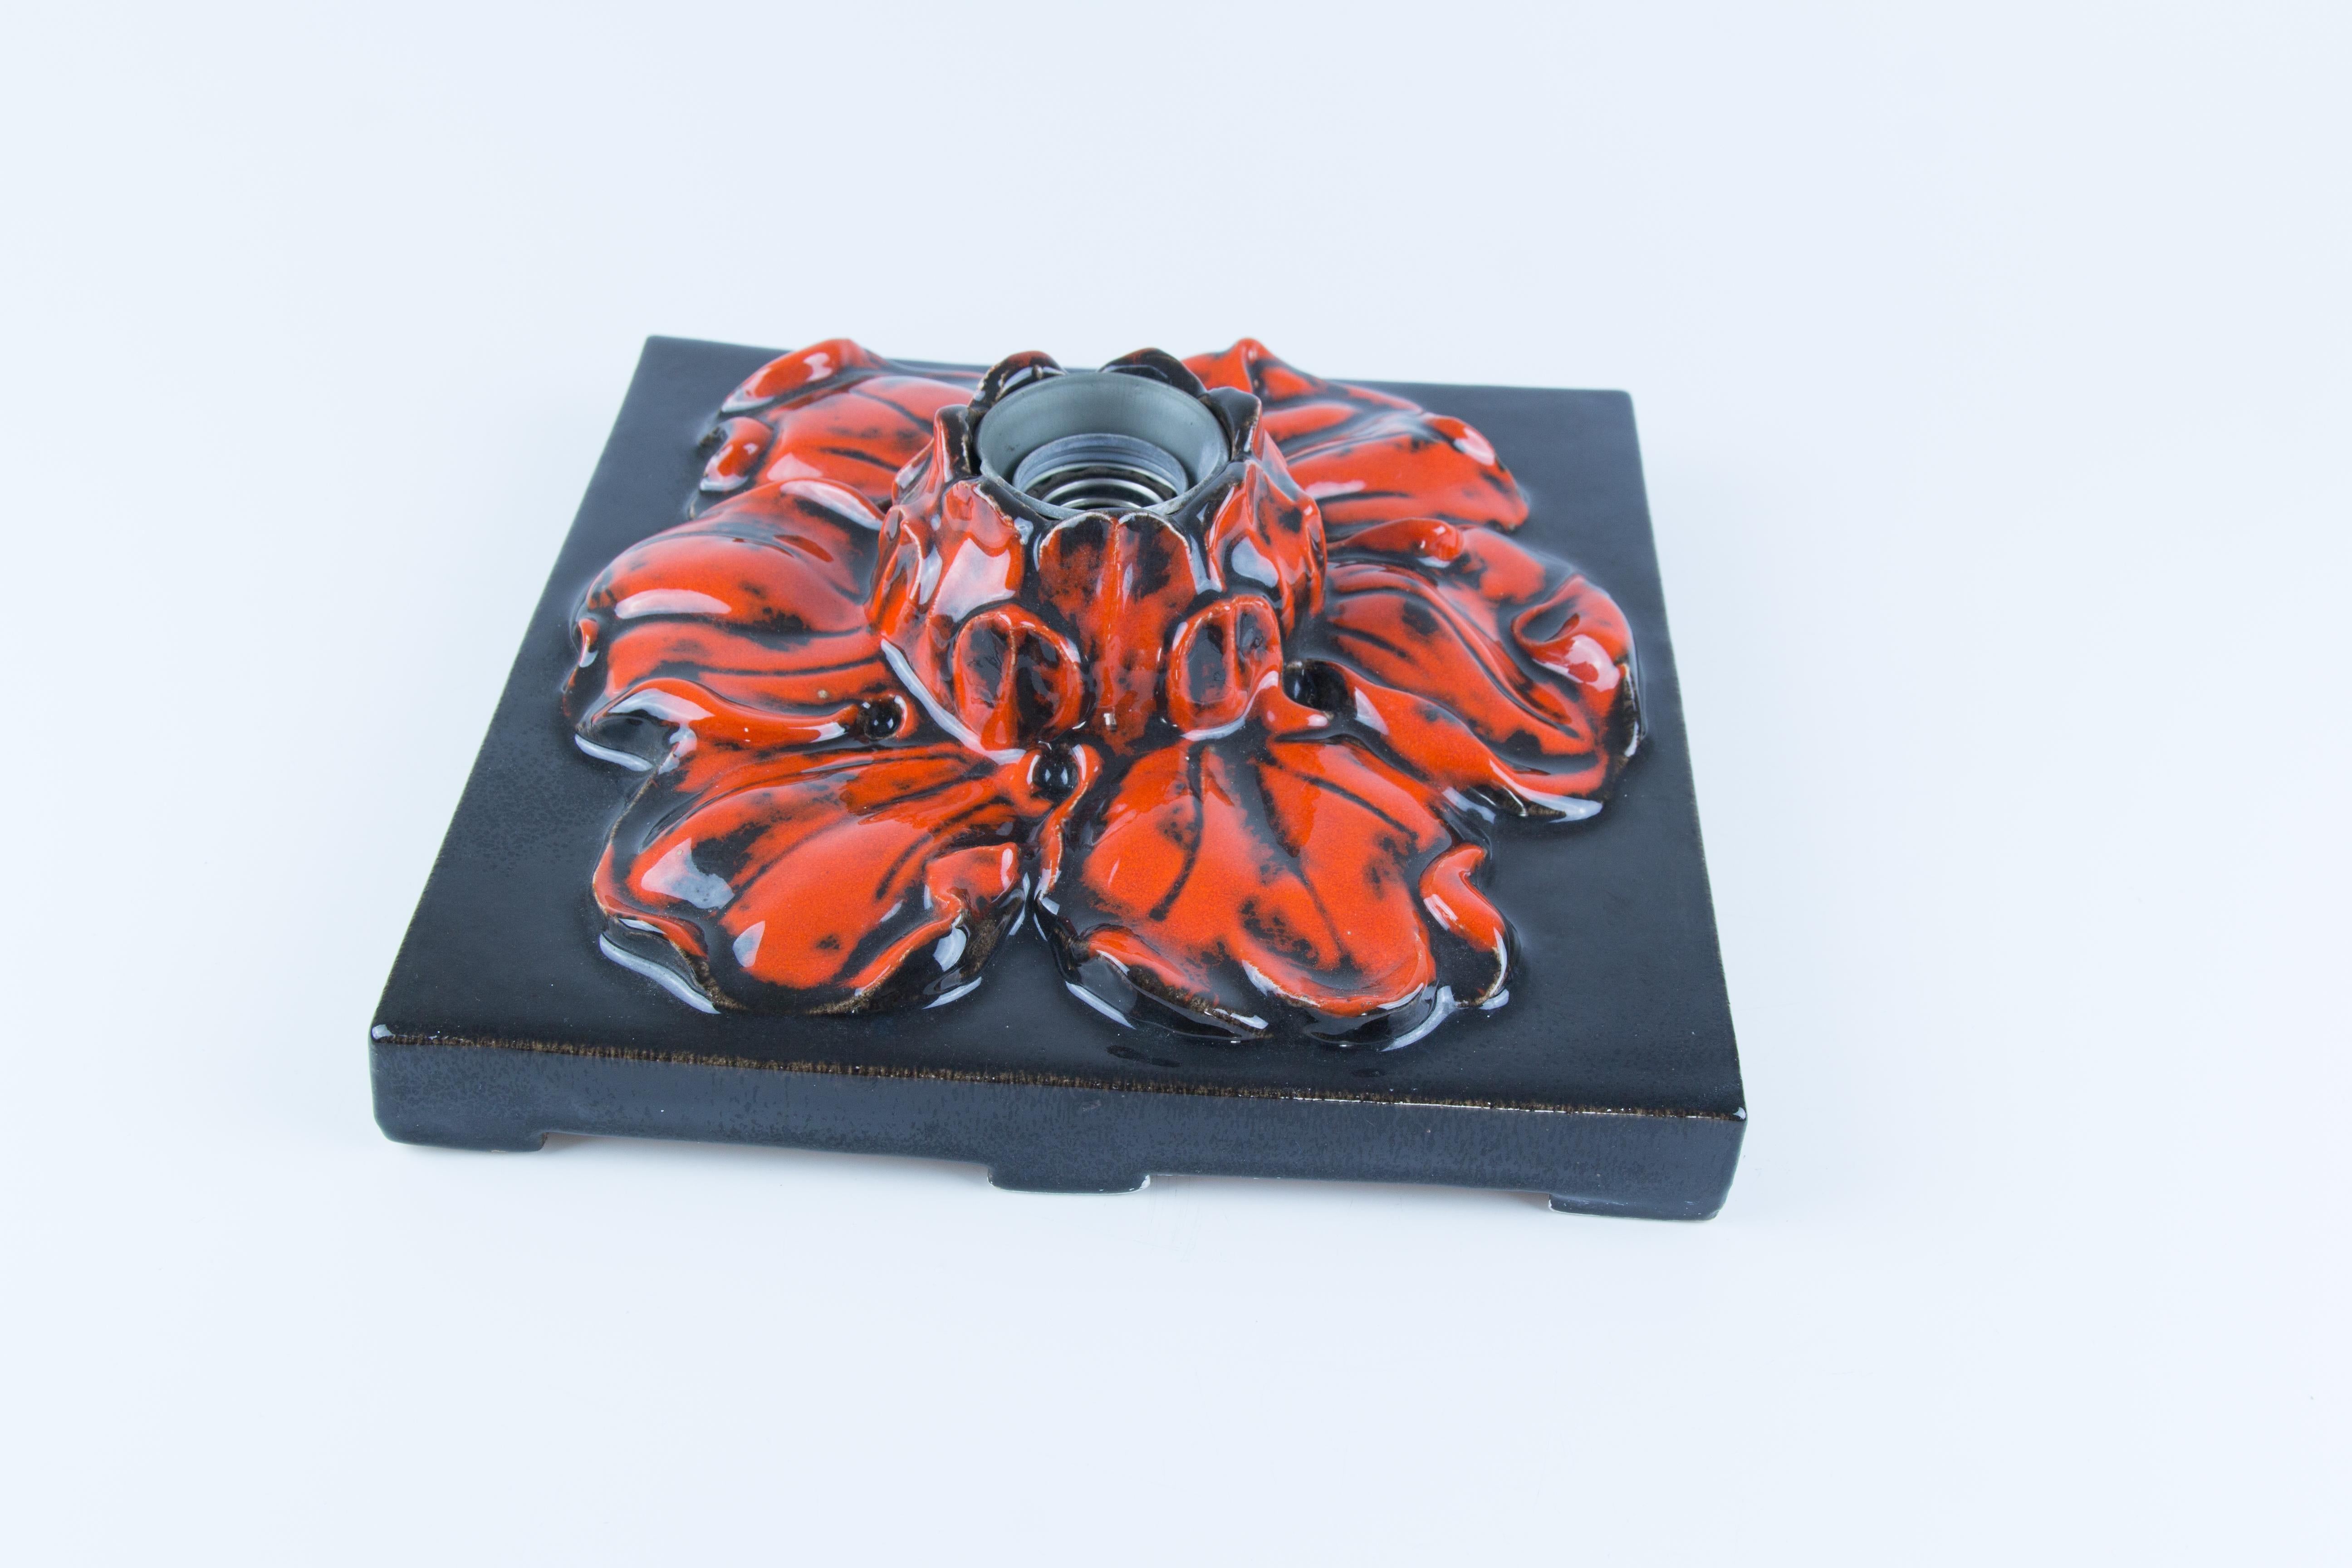 German Ceramic Red and Black Flower Shaped Square Wall or Ceiling Lamp, 1960s For Sale 8